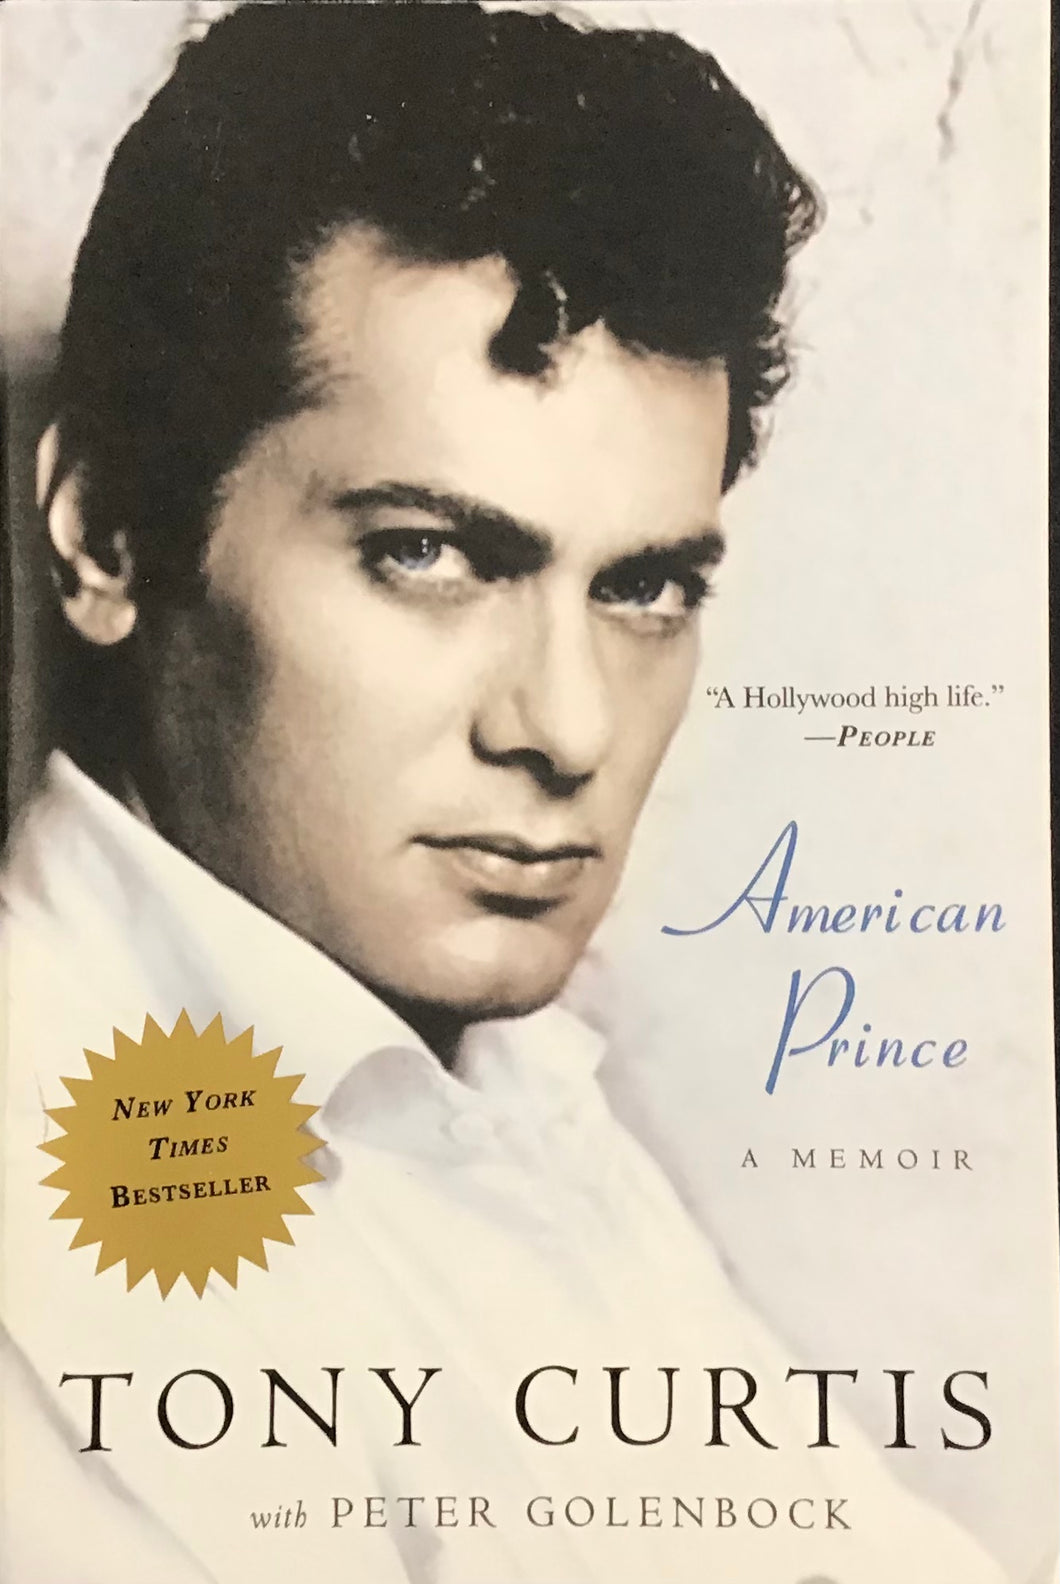 American Prince, Tony Curtis with Peter Goldenbock